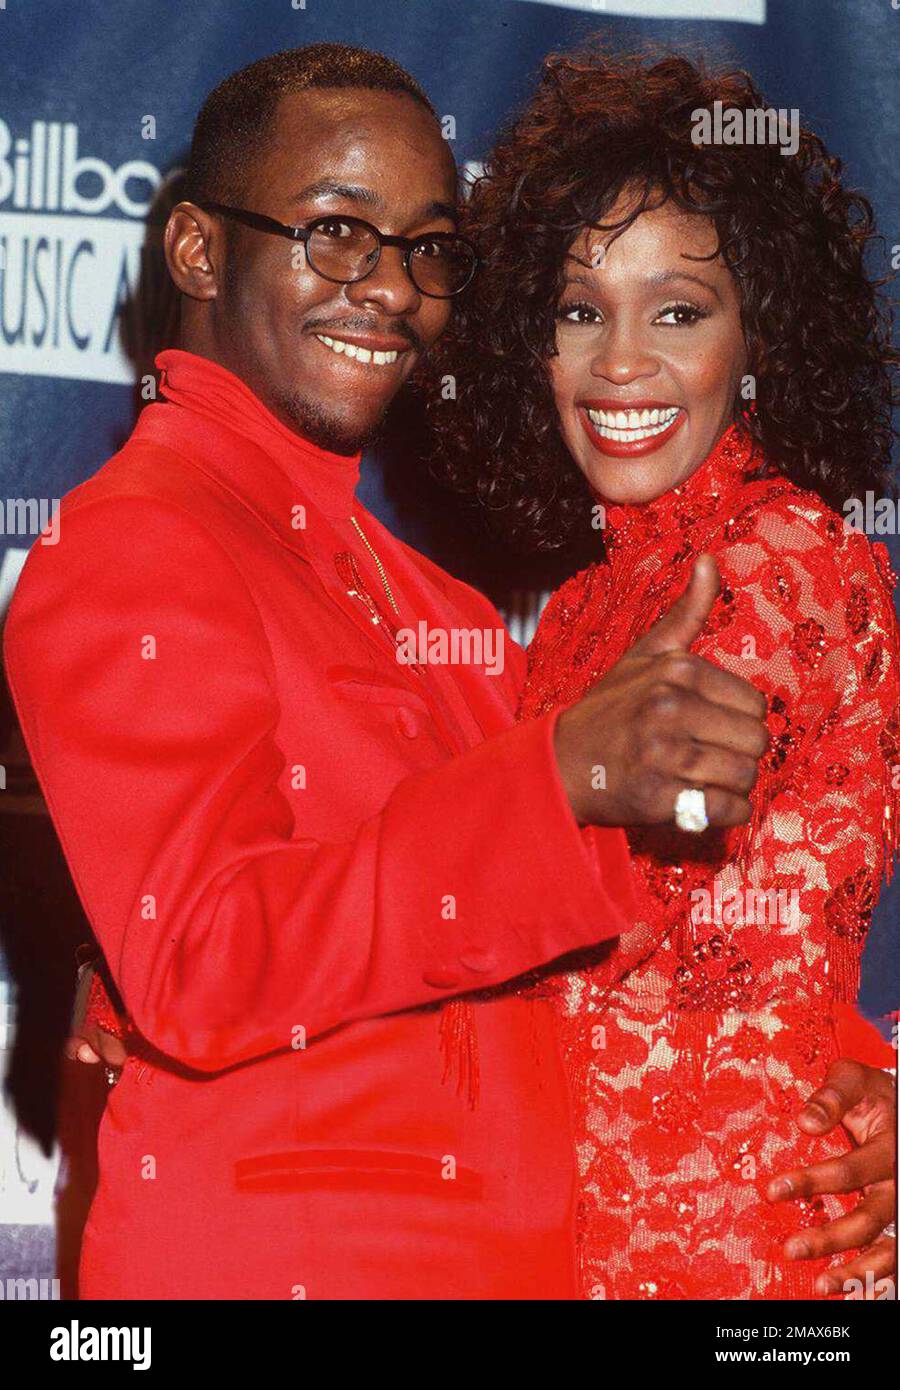 Whitney Houston with Bobby Brown ( and daughter Christina )Event in Hollywood Life - California, Red Carpet Event, USA, Film Industry, Celebrities, Photography, Bestof, Arts Culture and Entertainment, Topix Celebrities fashion, Best of, Hollywood Life, Event in Hollywood Life - California, Red Carpet and backstage, , Music celebrities, Musician, Music Group, Topix, Bestof, Arts Culture and Entertainment, Photography, People from the cast, TV show and cast inquiry tsuni@Gamma-USA.com , Credit Tsuni / USA, Stock Photo